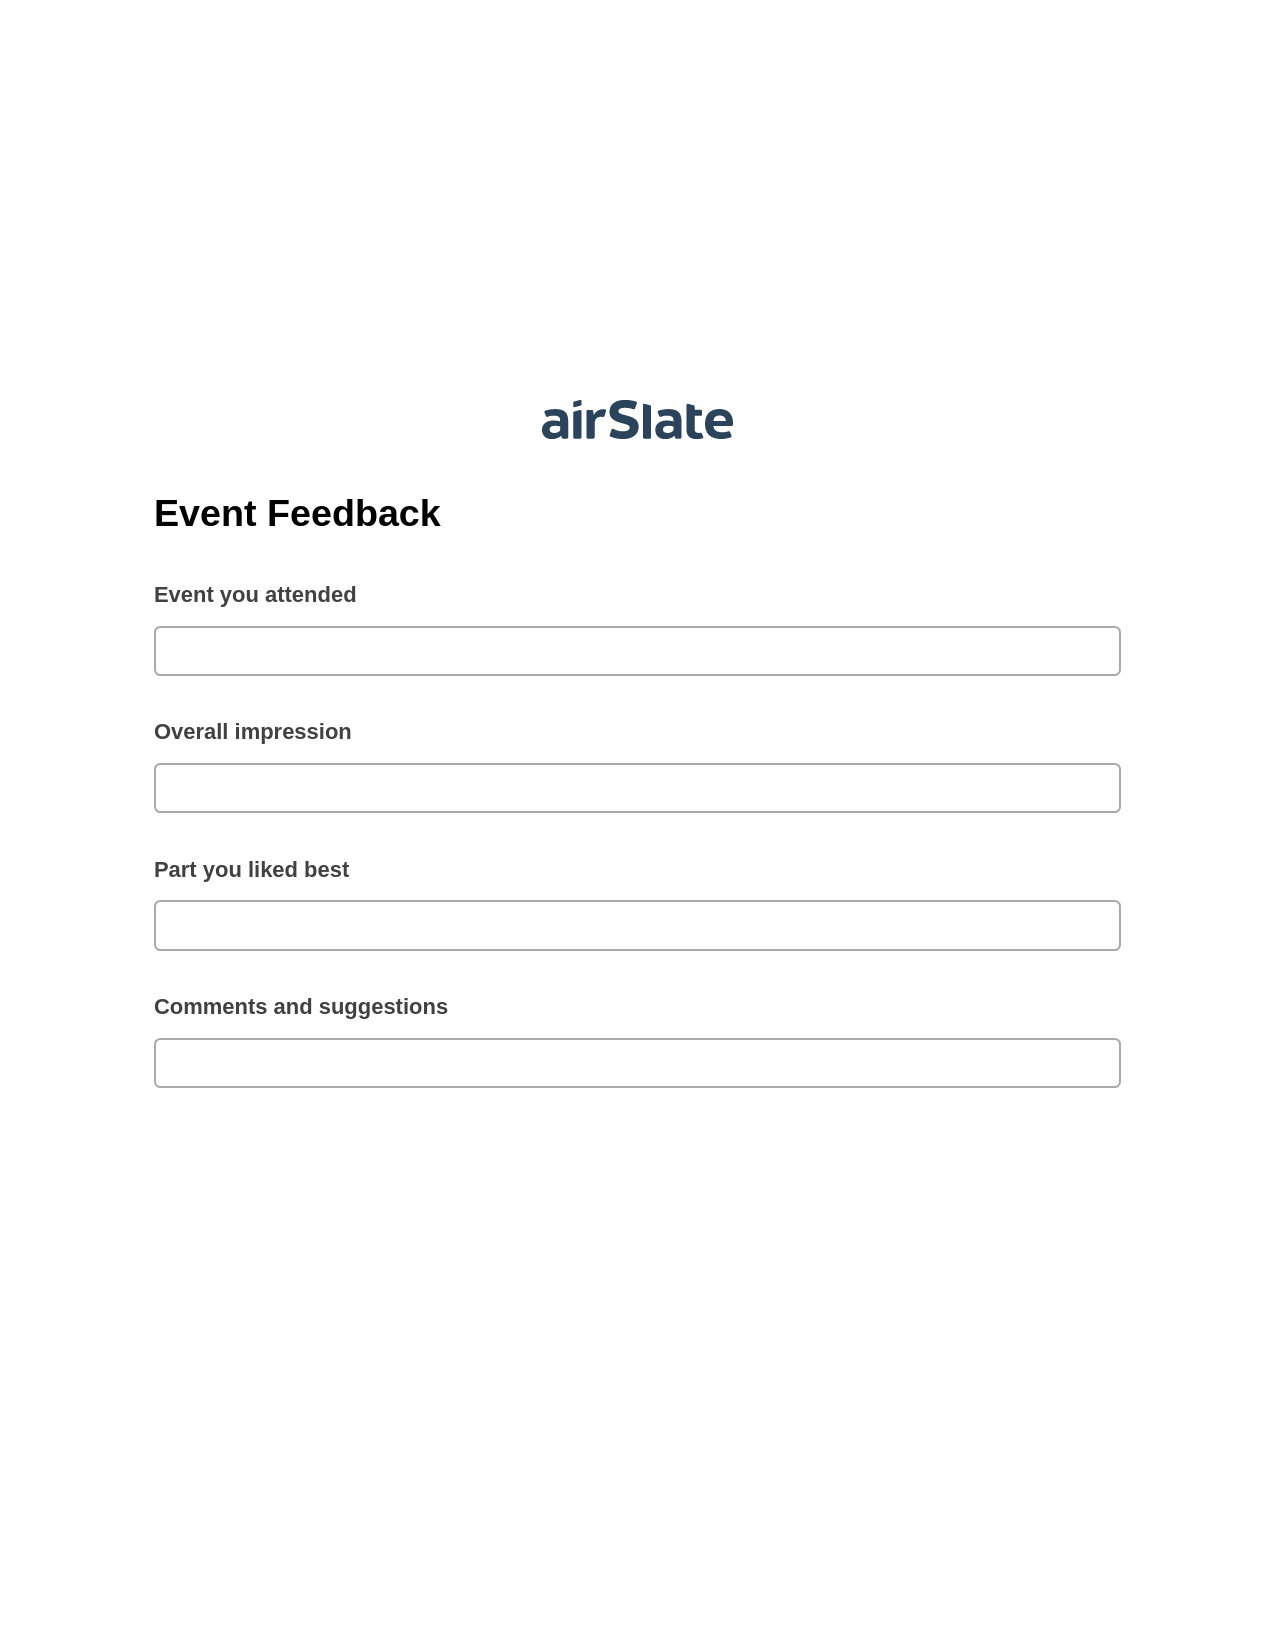 Event Feedback Pre-fill Dropdown from Airtable, Audit Trail Bot, Dropbox Bot